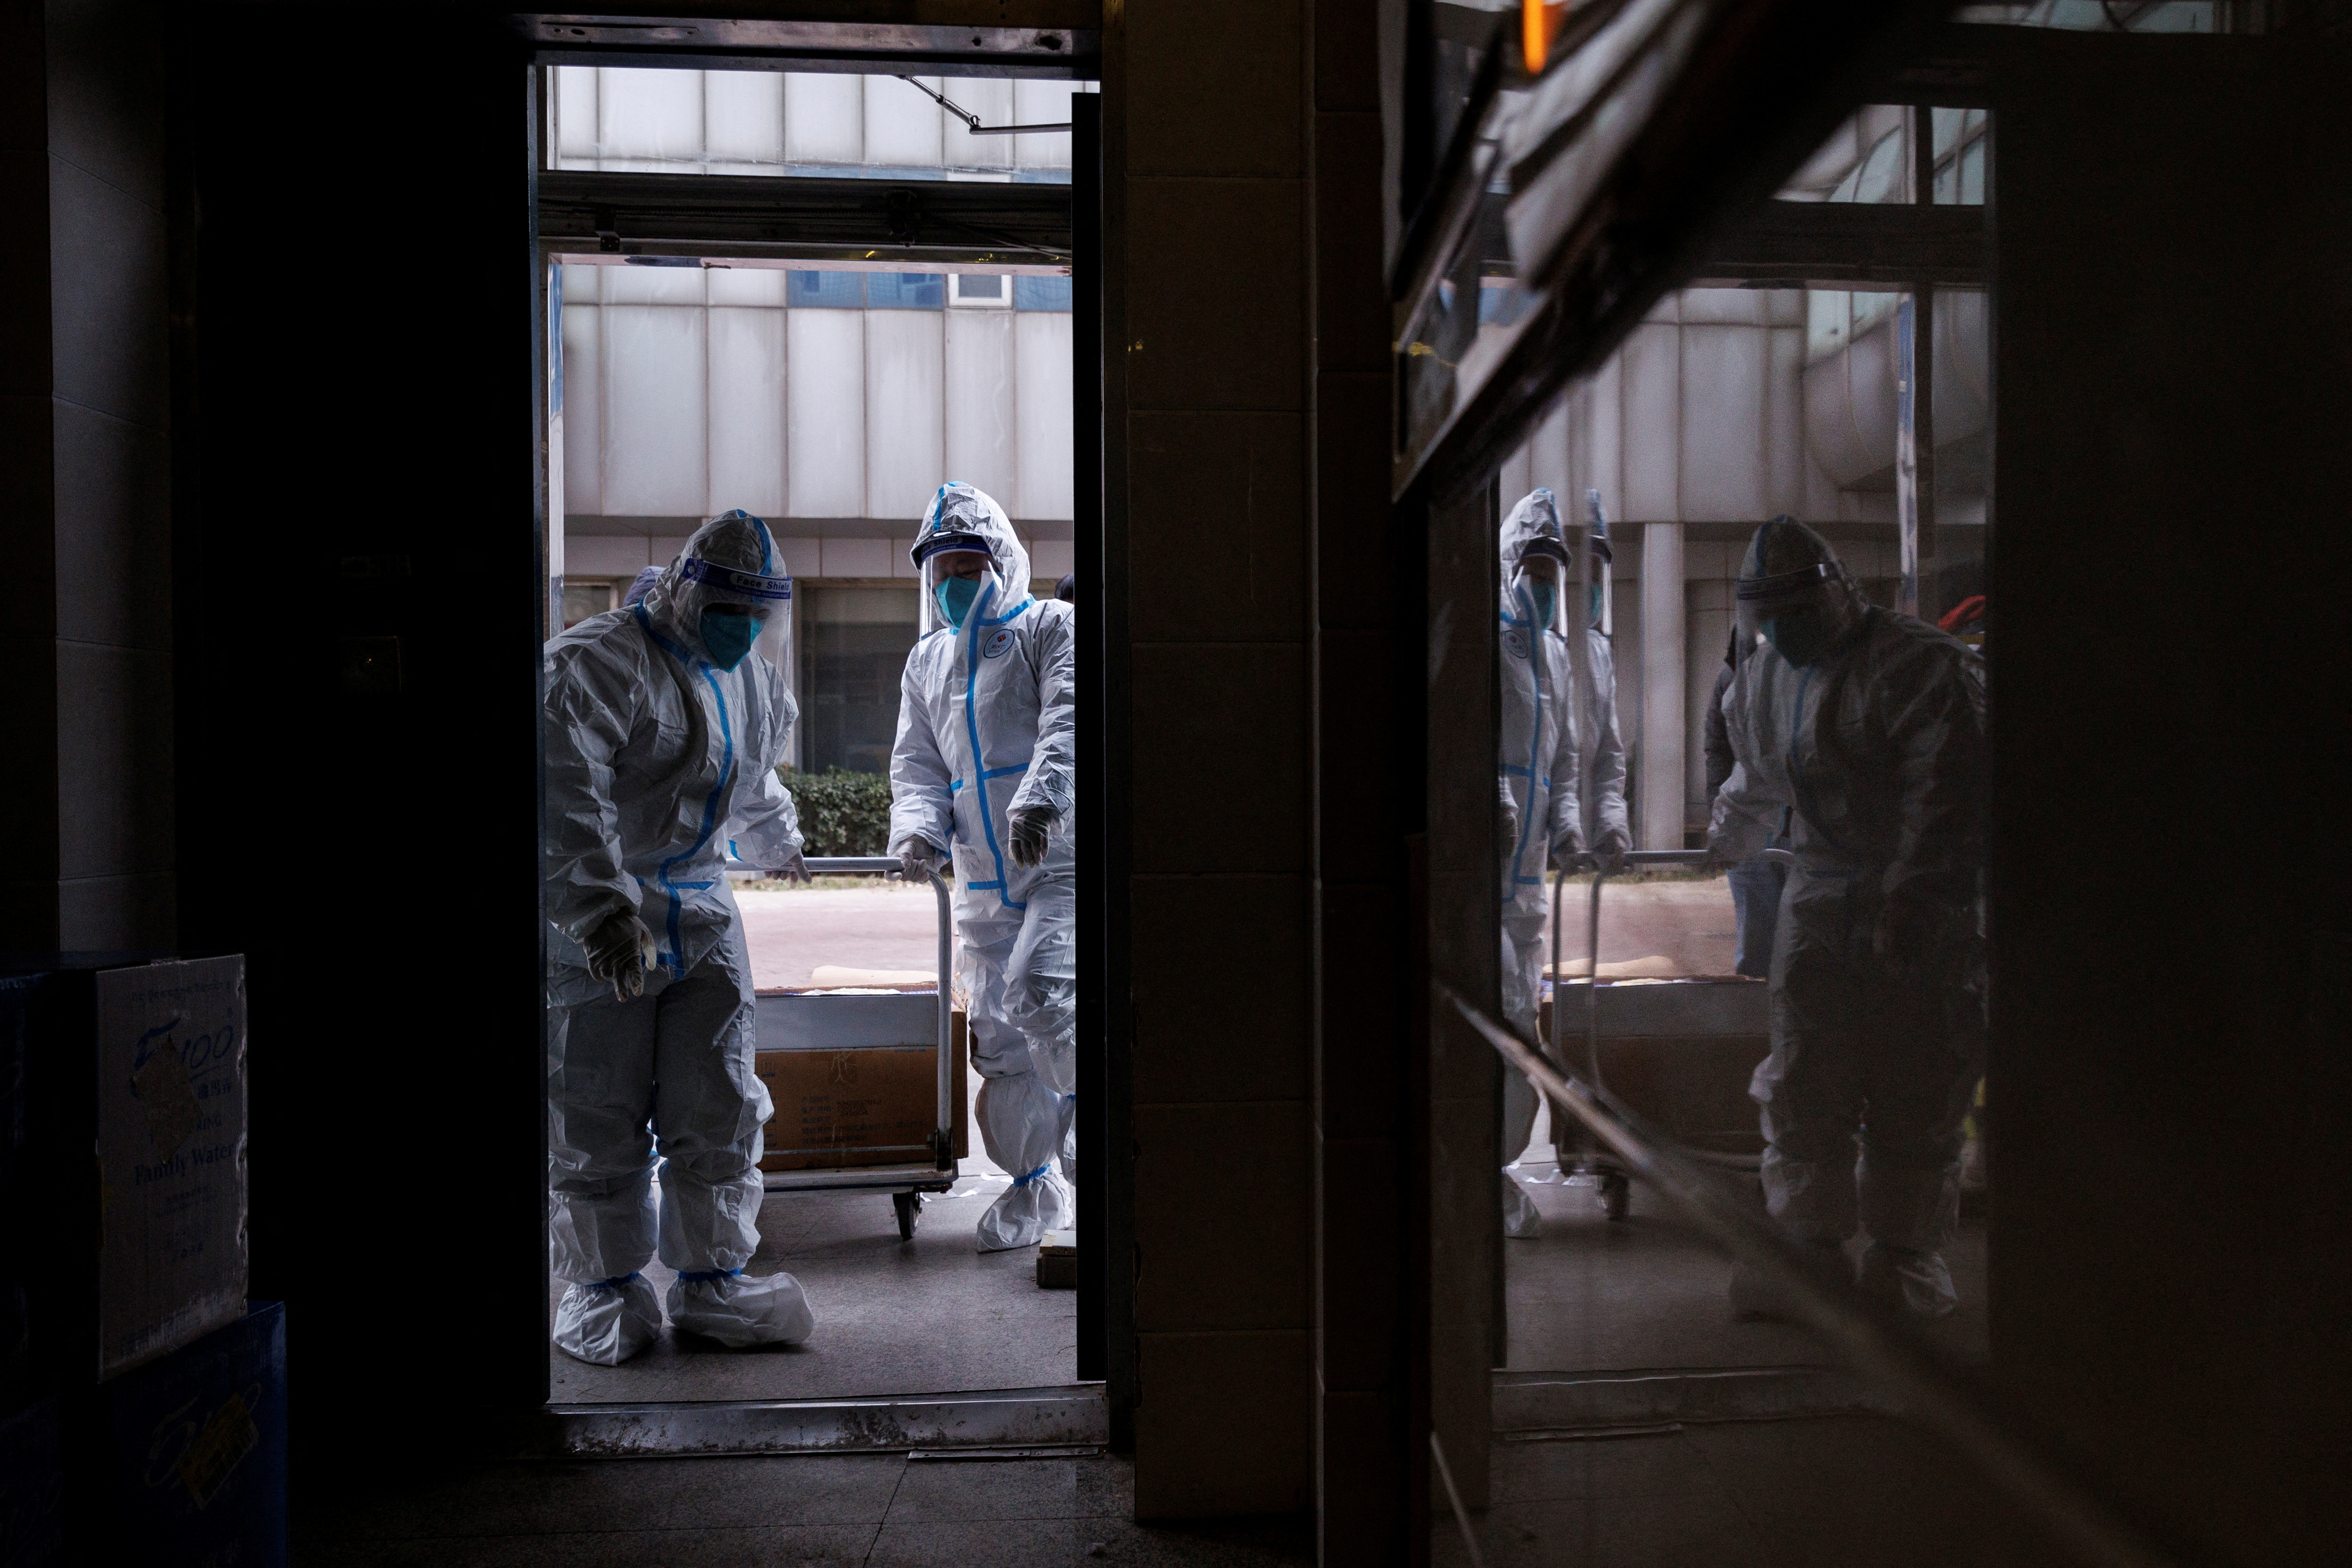 Pandemic prevention workers in protective suits enter an apartment building that went into lockdown as coronavirus disease (COVID-19) outbreaks continue in Beijing